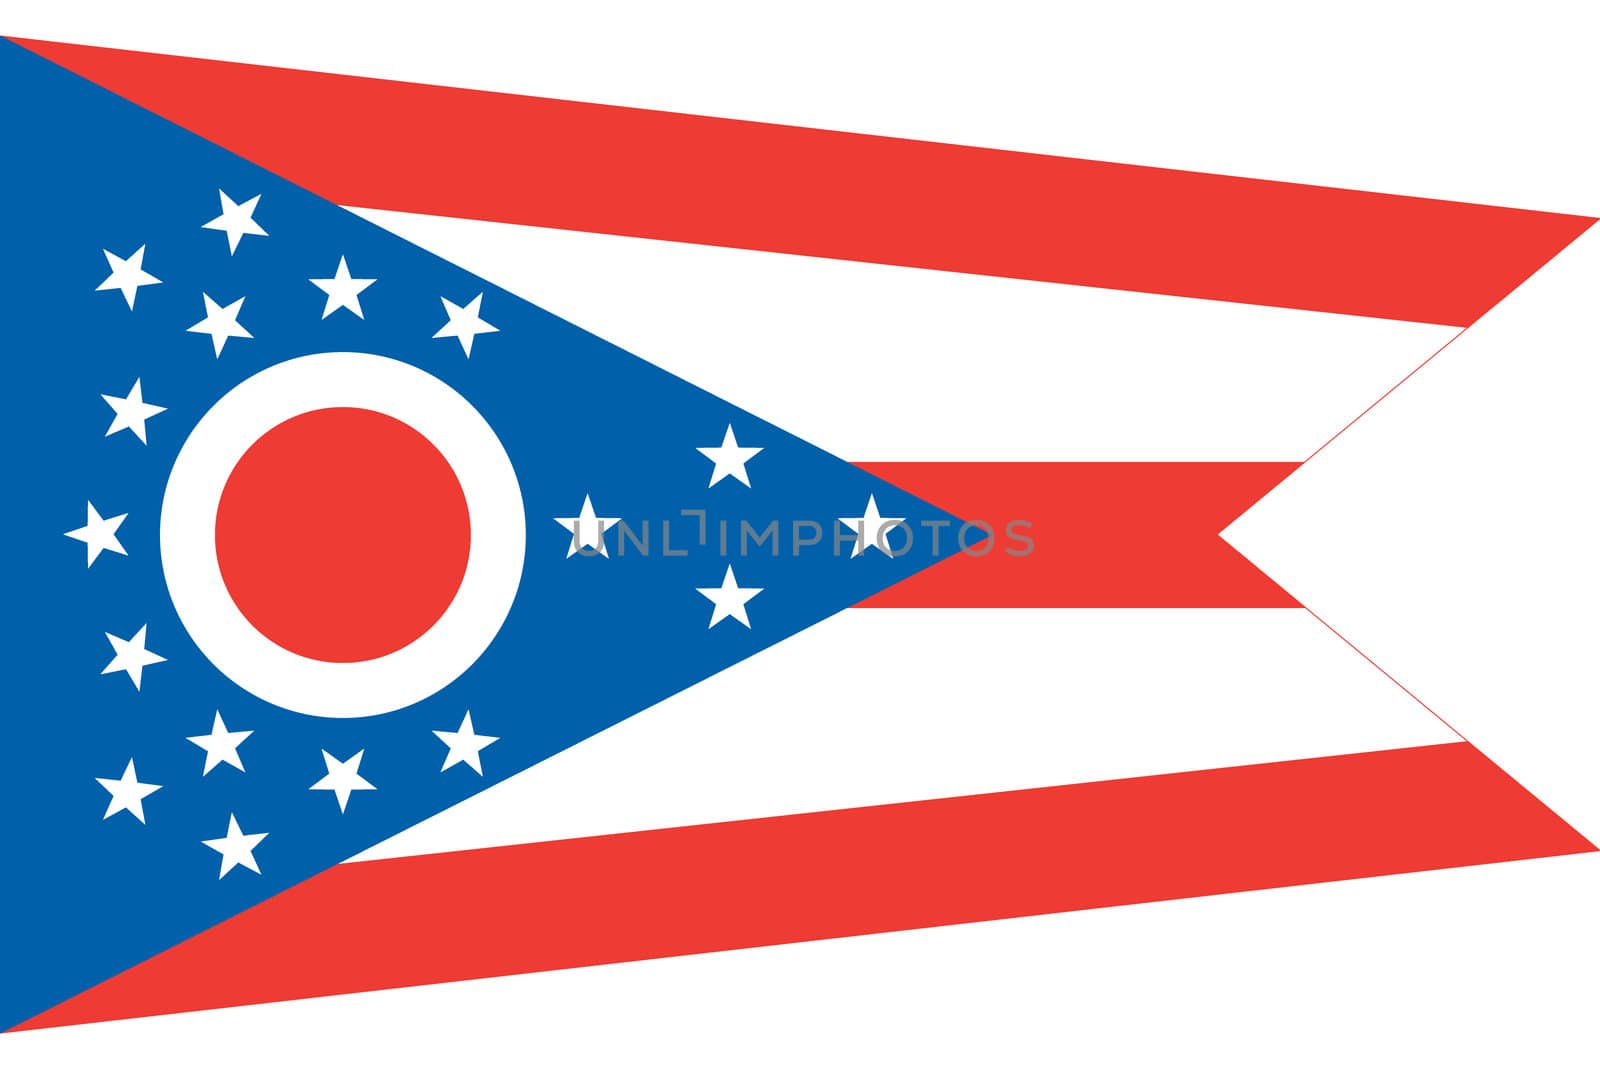 The Flag of the American State of Ohio